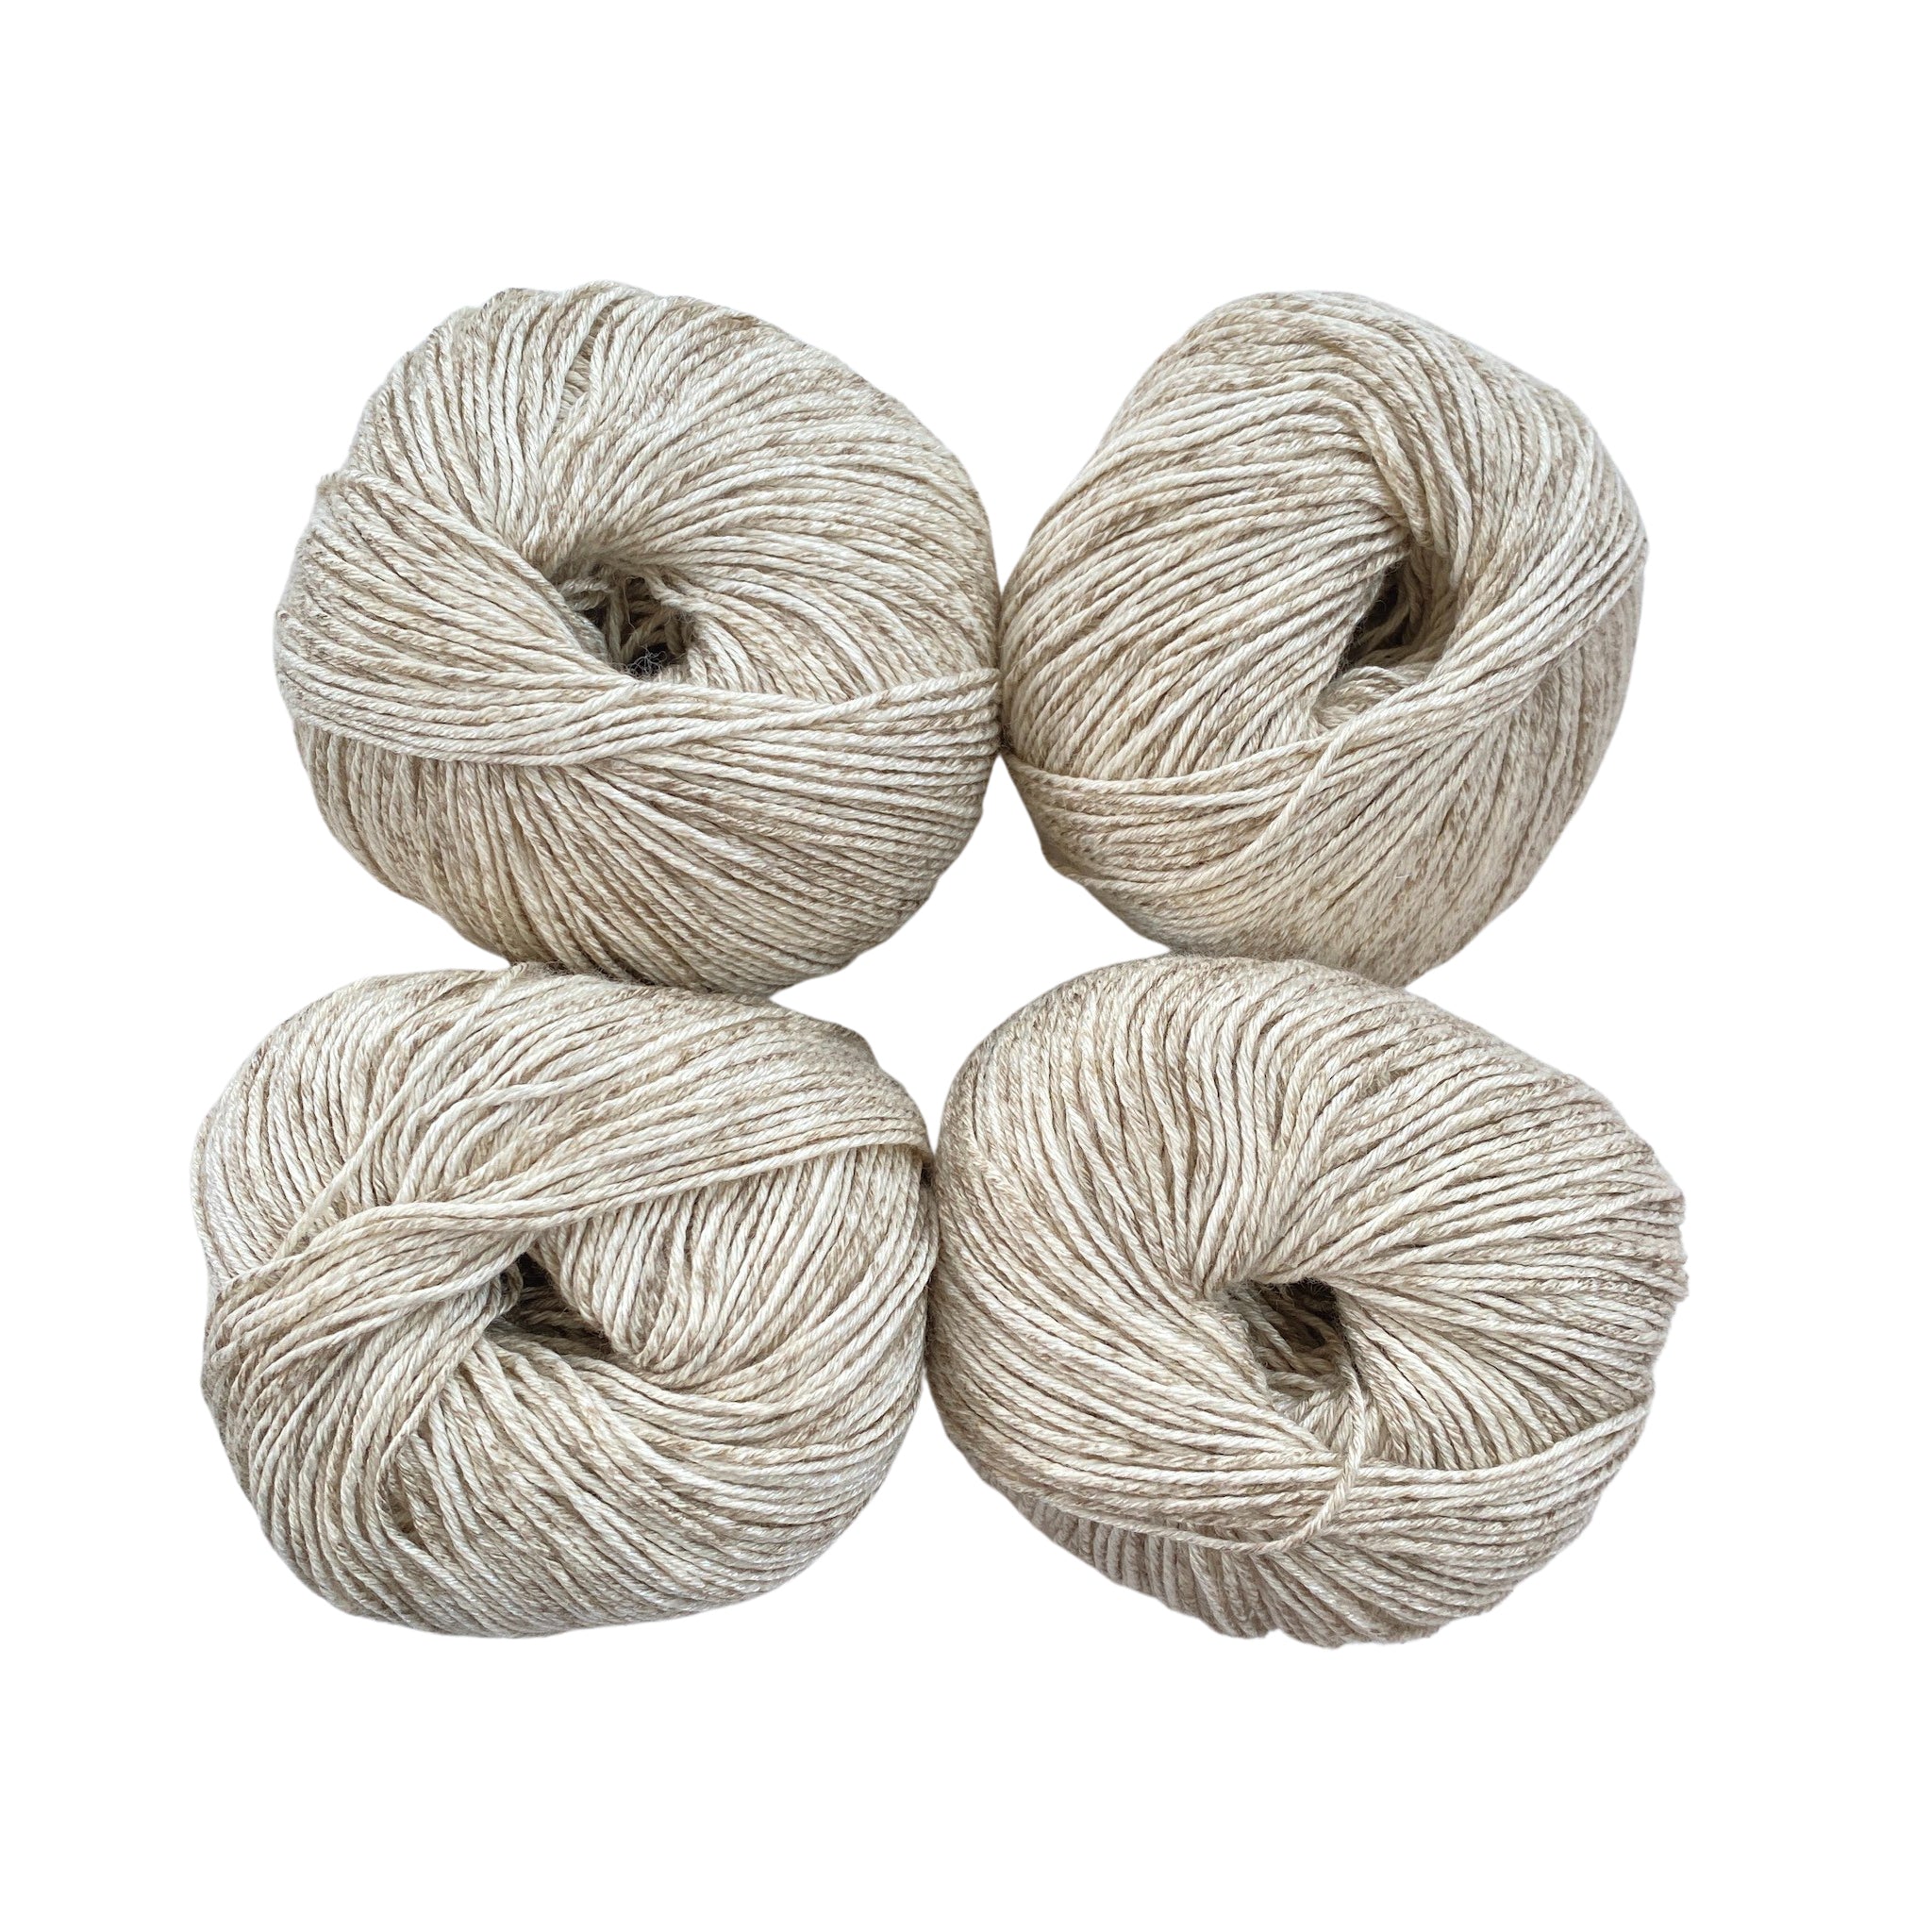 Bamboo / Cotton Yarn for Dyeing